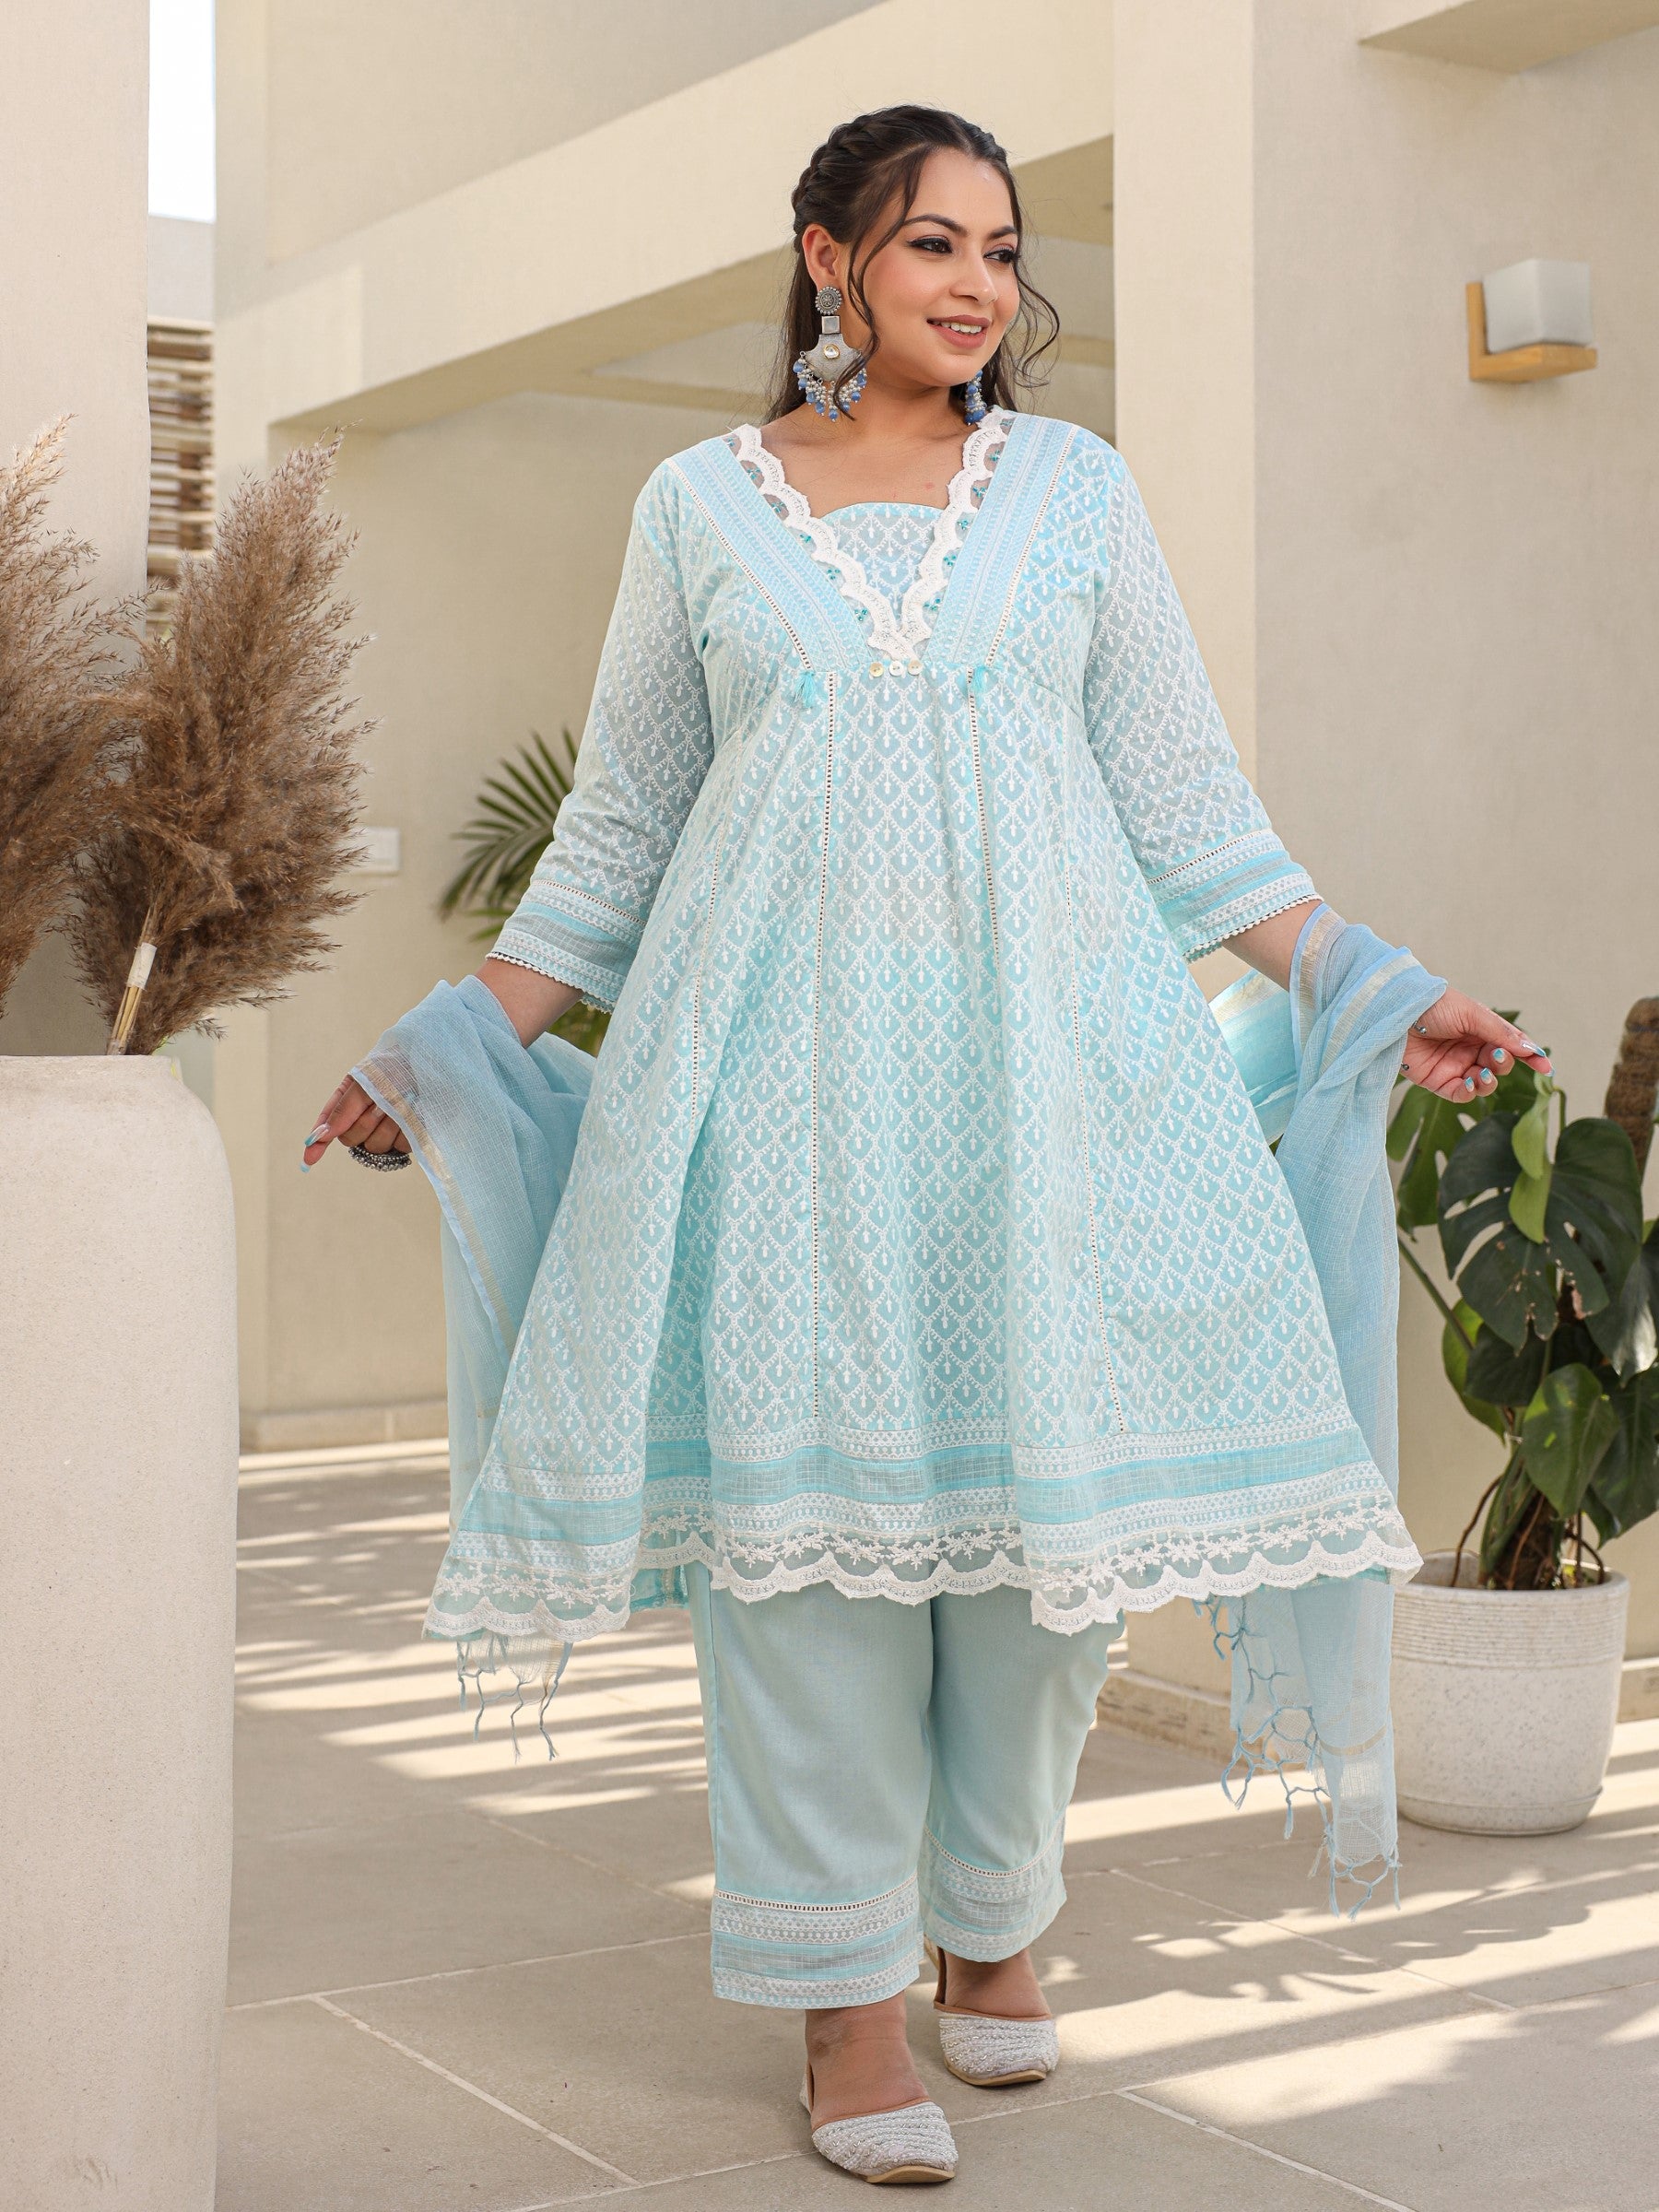 The Rooh Sky Blue Ethnic Motif Printed & Laced Pure Cotton Plus Size Anarkali Kurta Pants & Dupatta Set With Tassels Sequins & Buttons